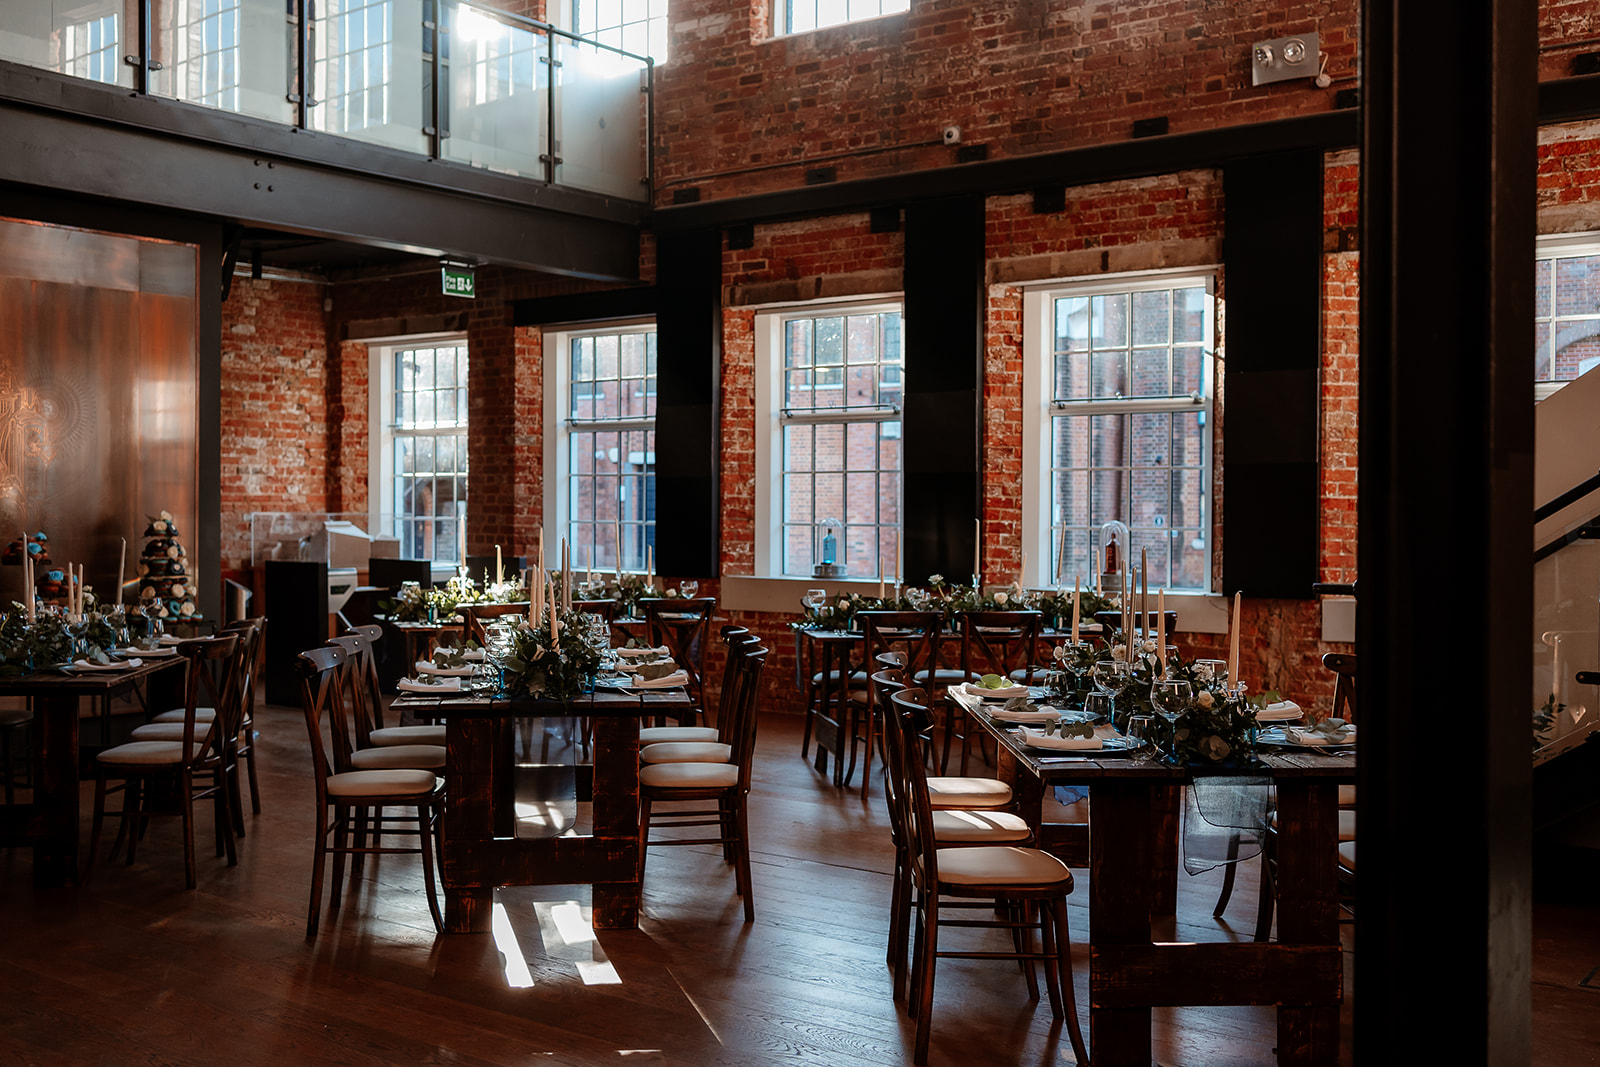 Wedding breakfast tables with green and white flower table runners and tapered candles at the Bombay Sapphire Distillery